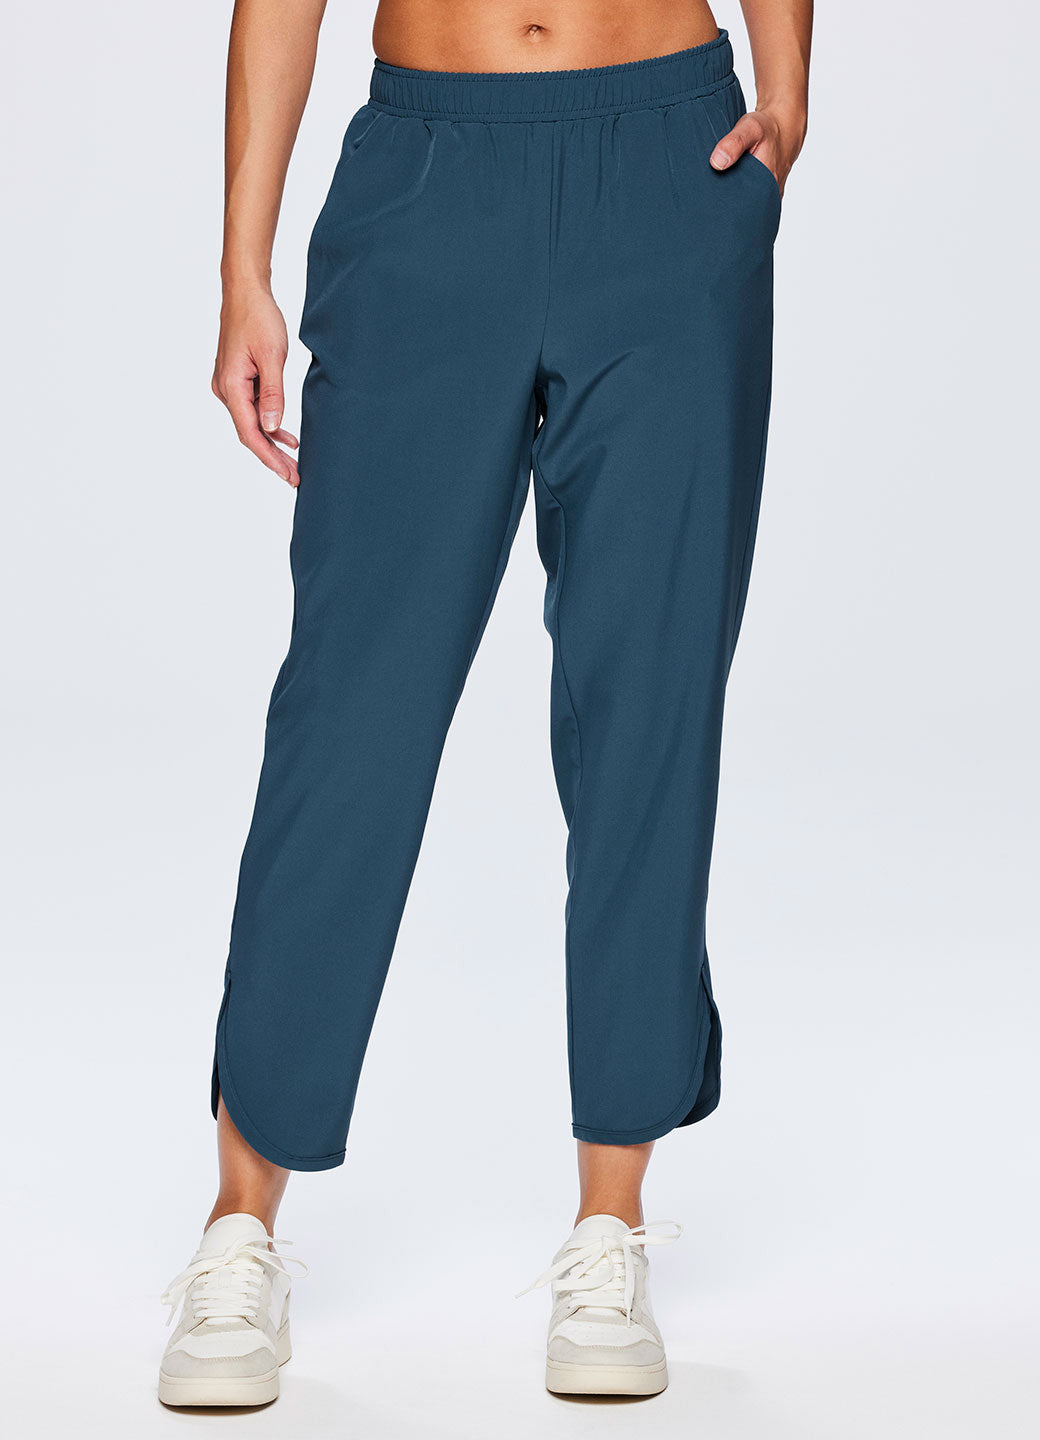 Gabby Everyday Ankle Pant